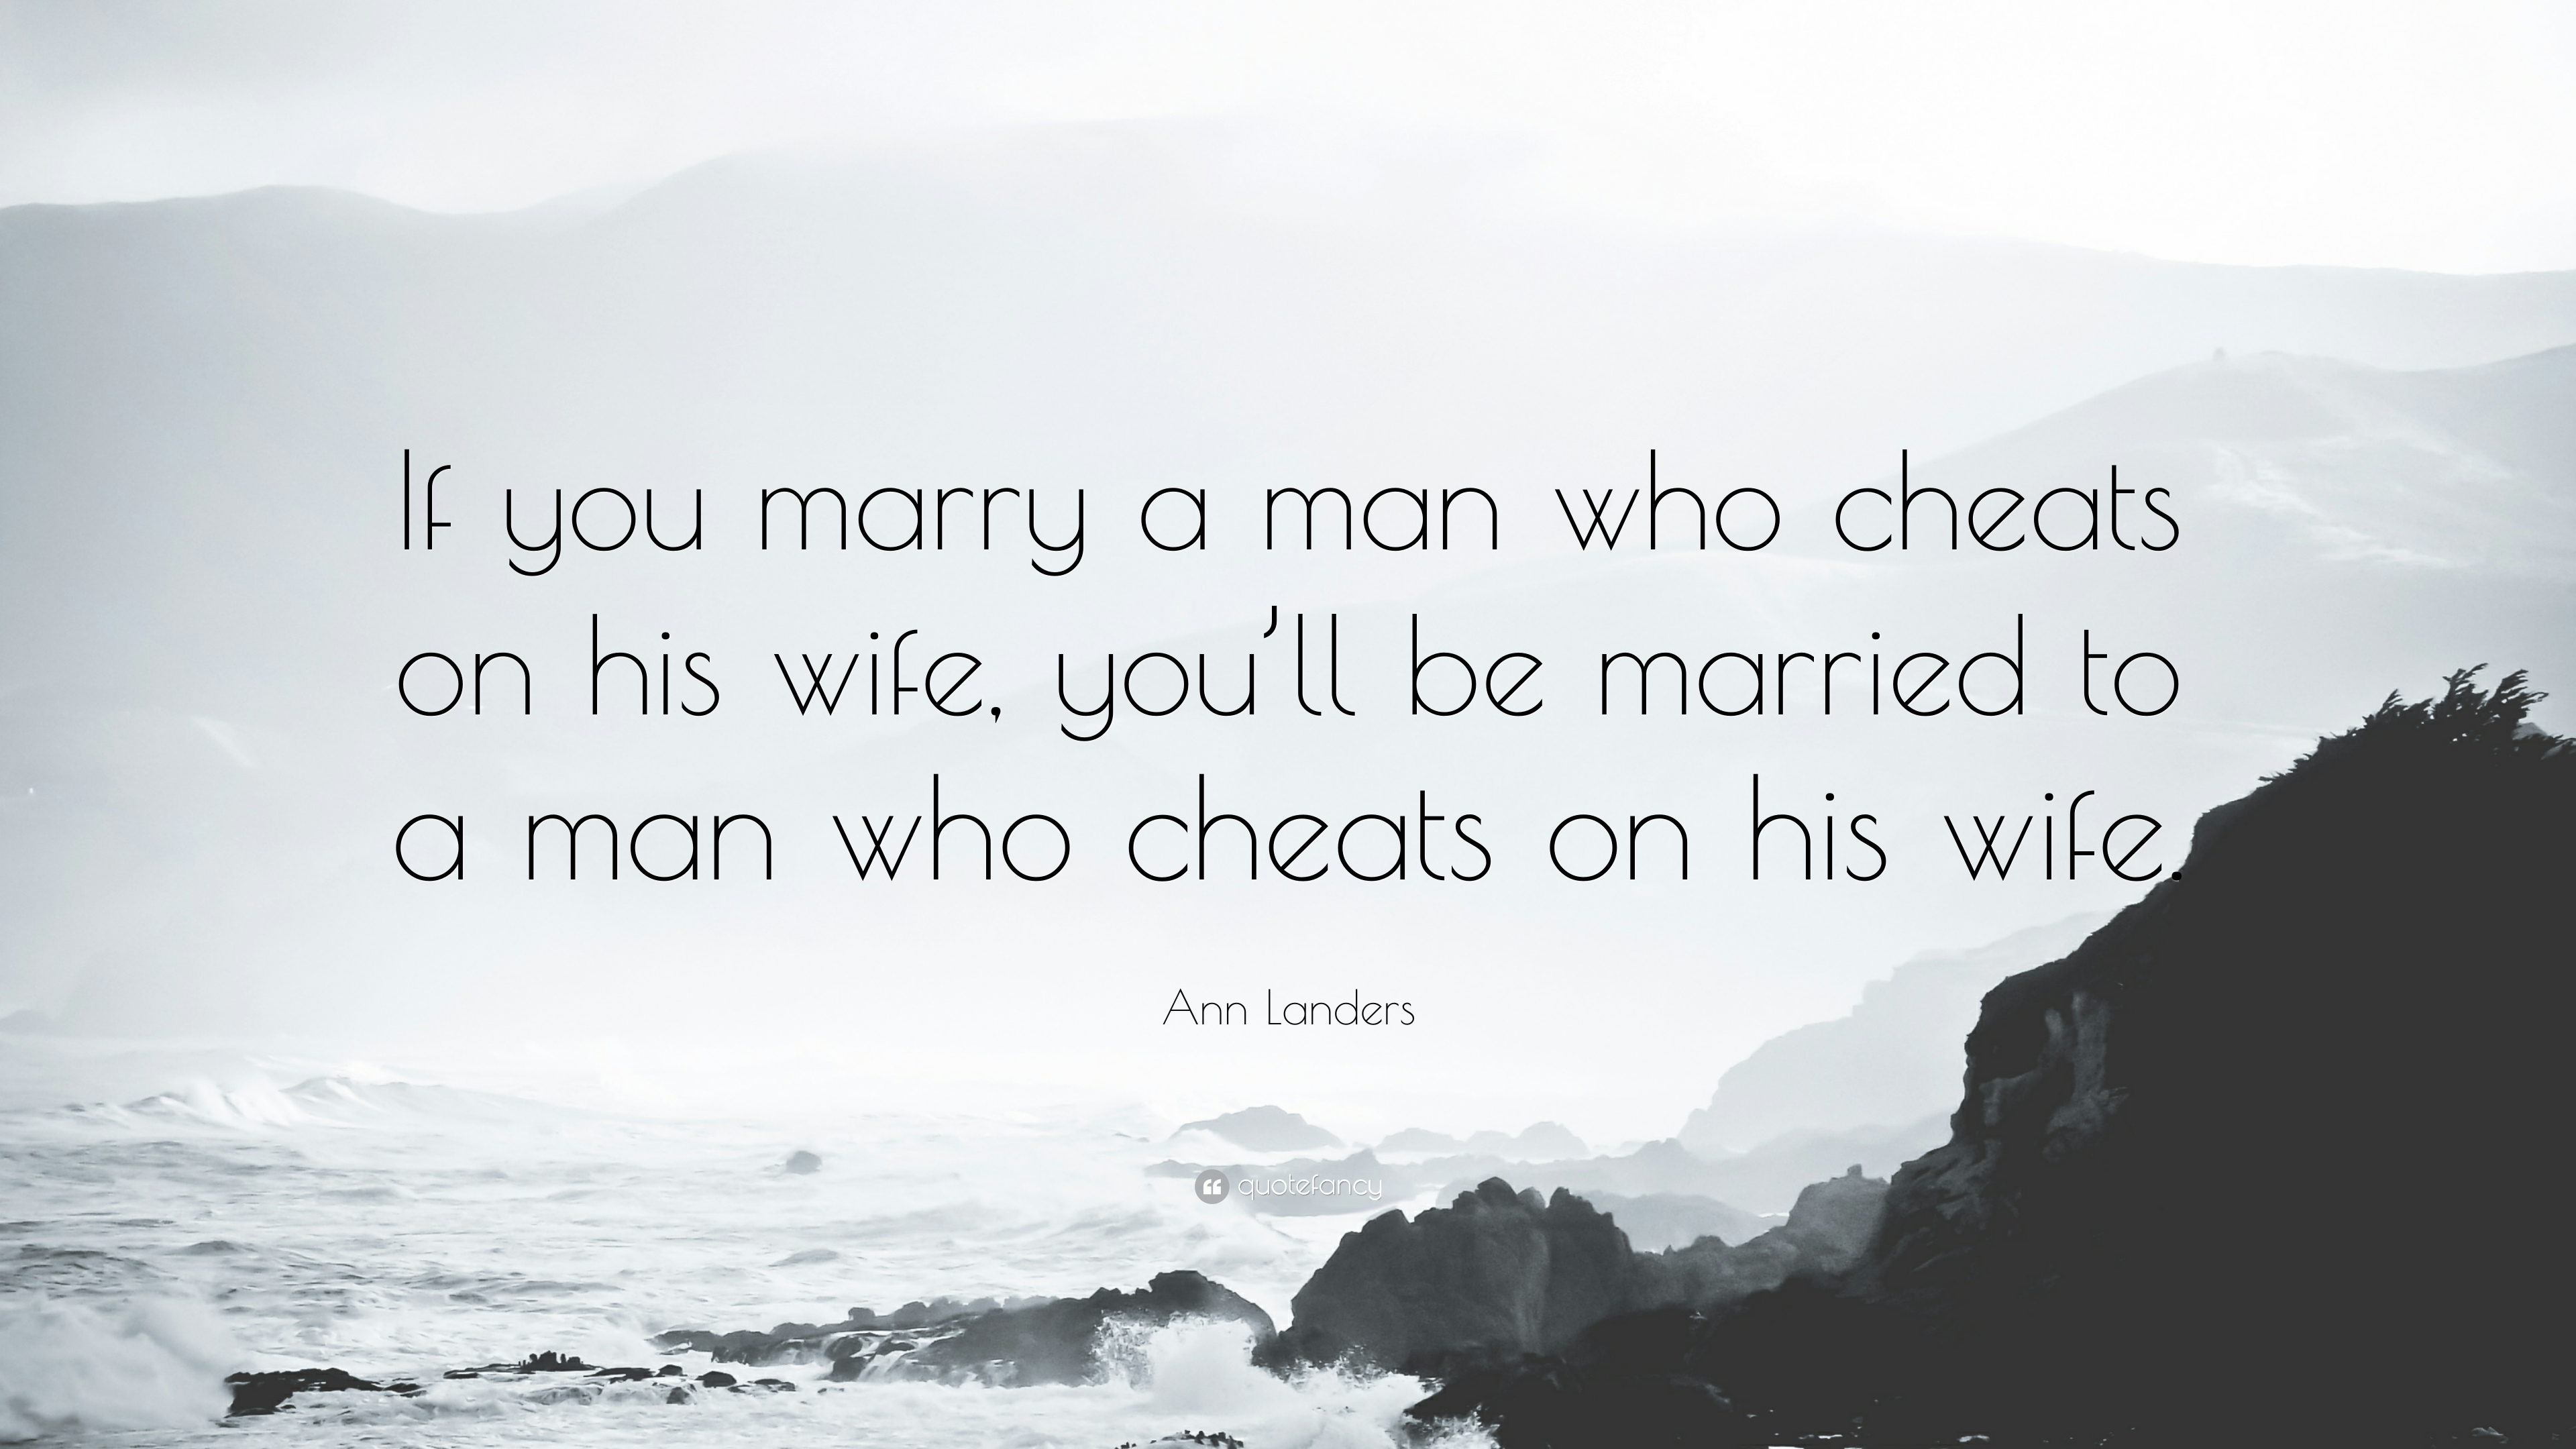 Ann Landers Quote: “If you marry a man who cheats on his wife, you